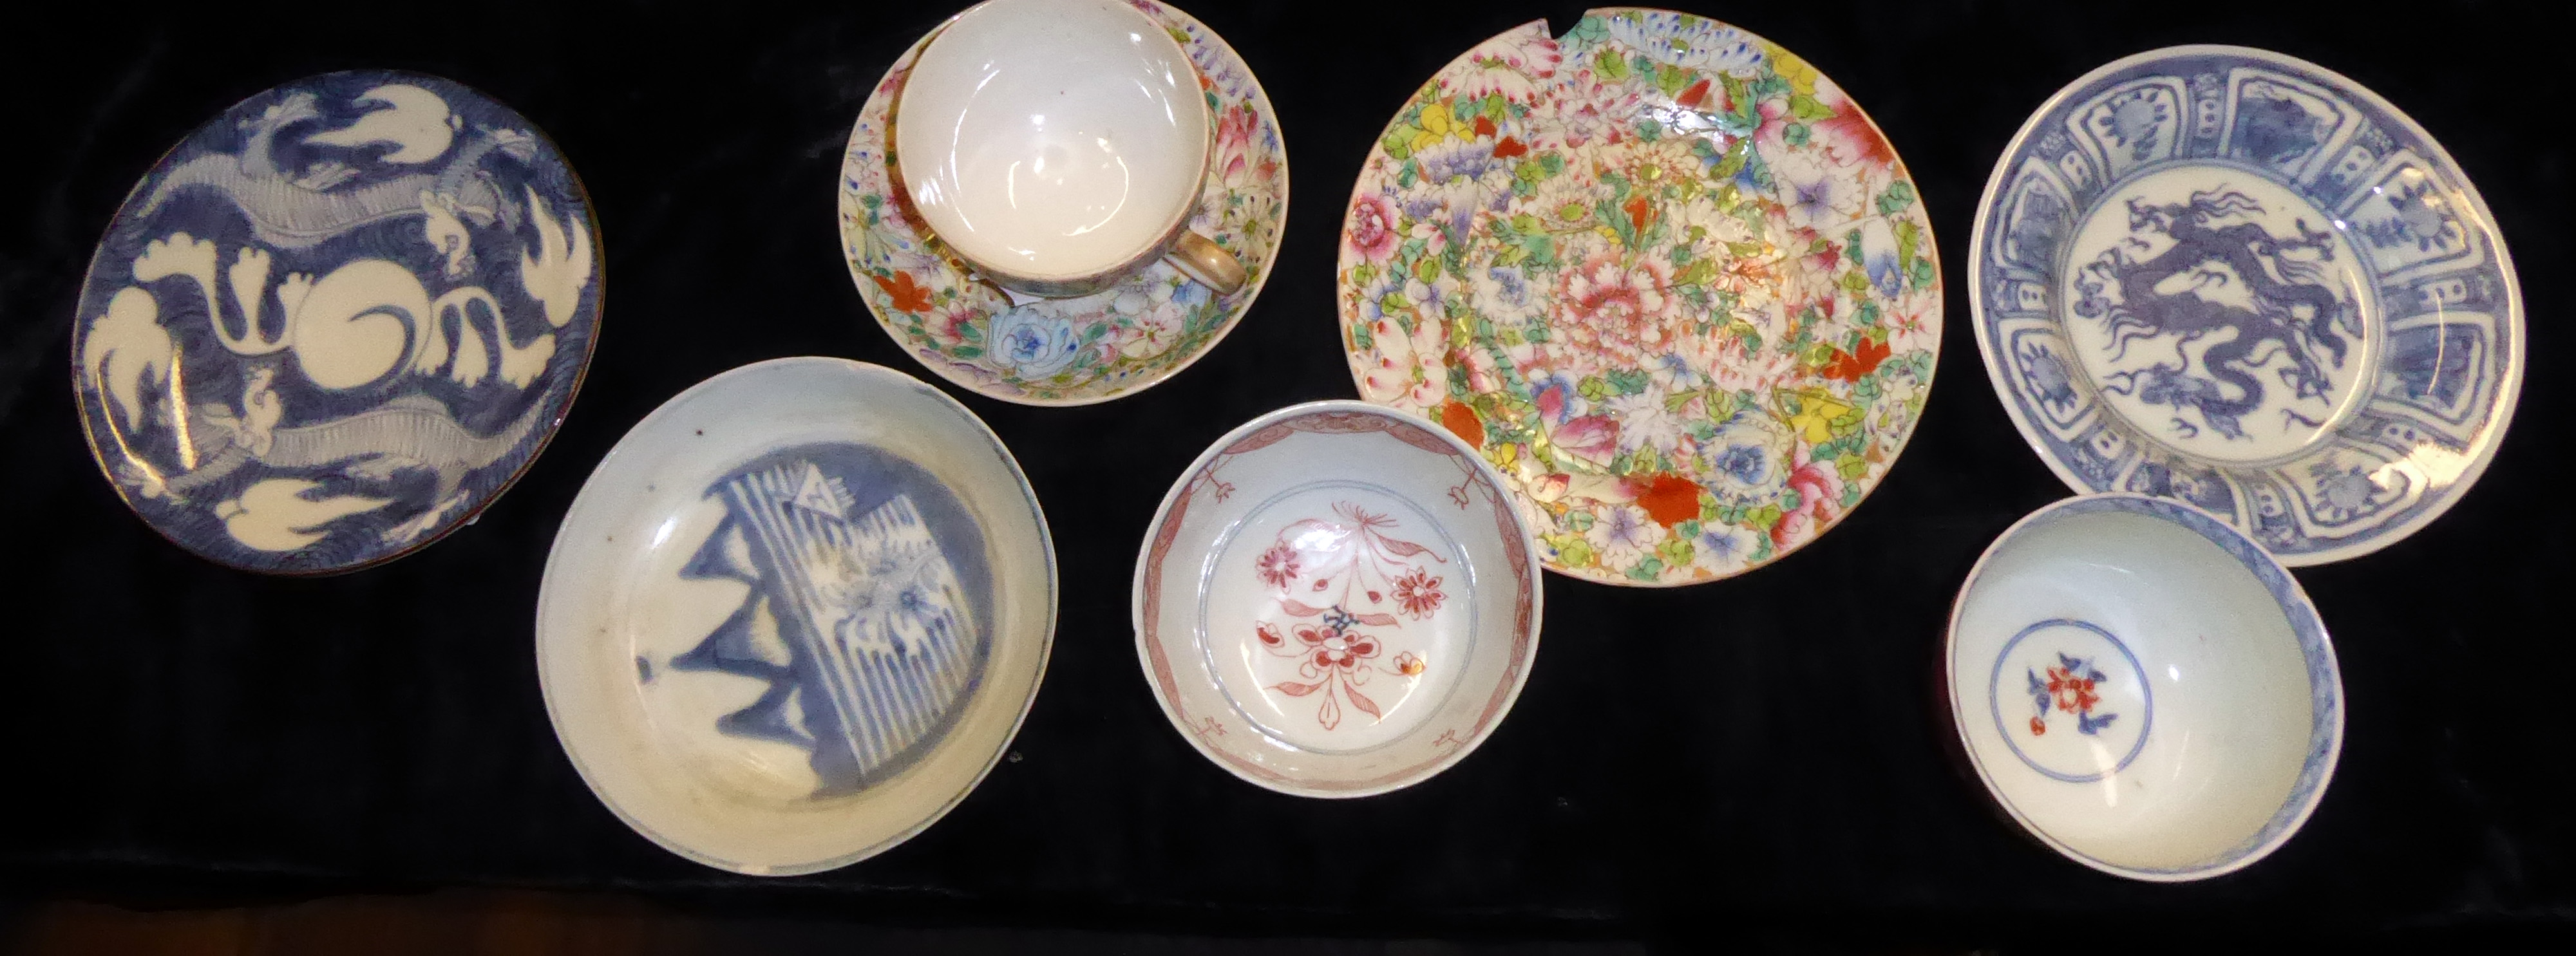 A COLLECTION OF 19TH CENTURY JAPANESE PORCELAIN ITEMS Comprising two Imari pattern bowls, one